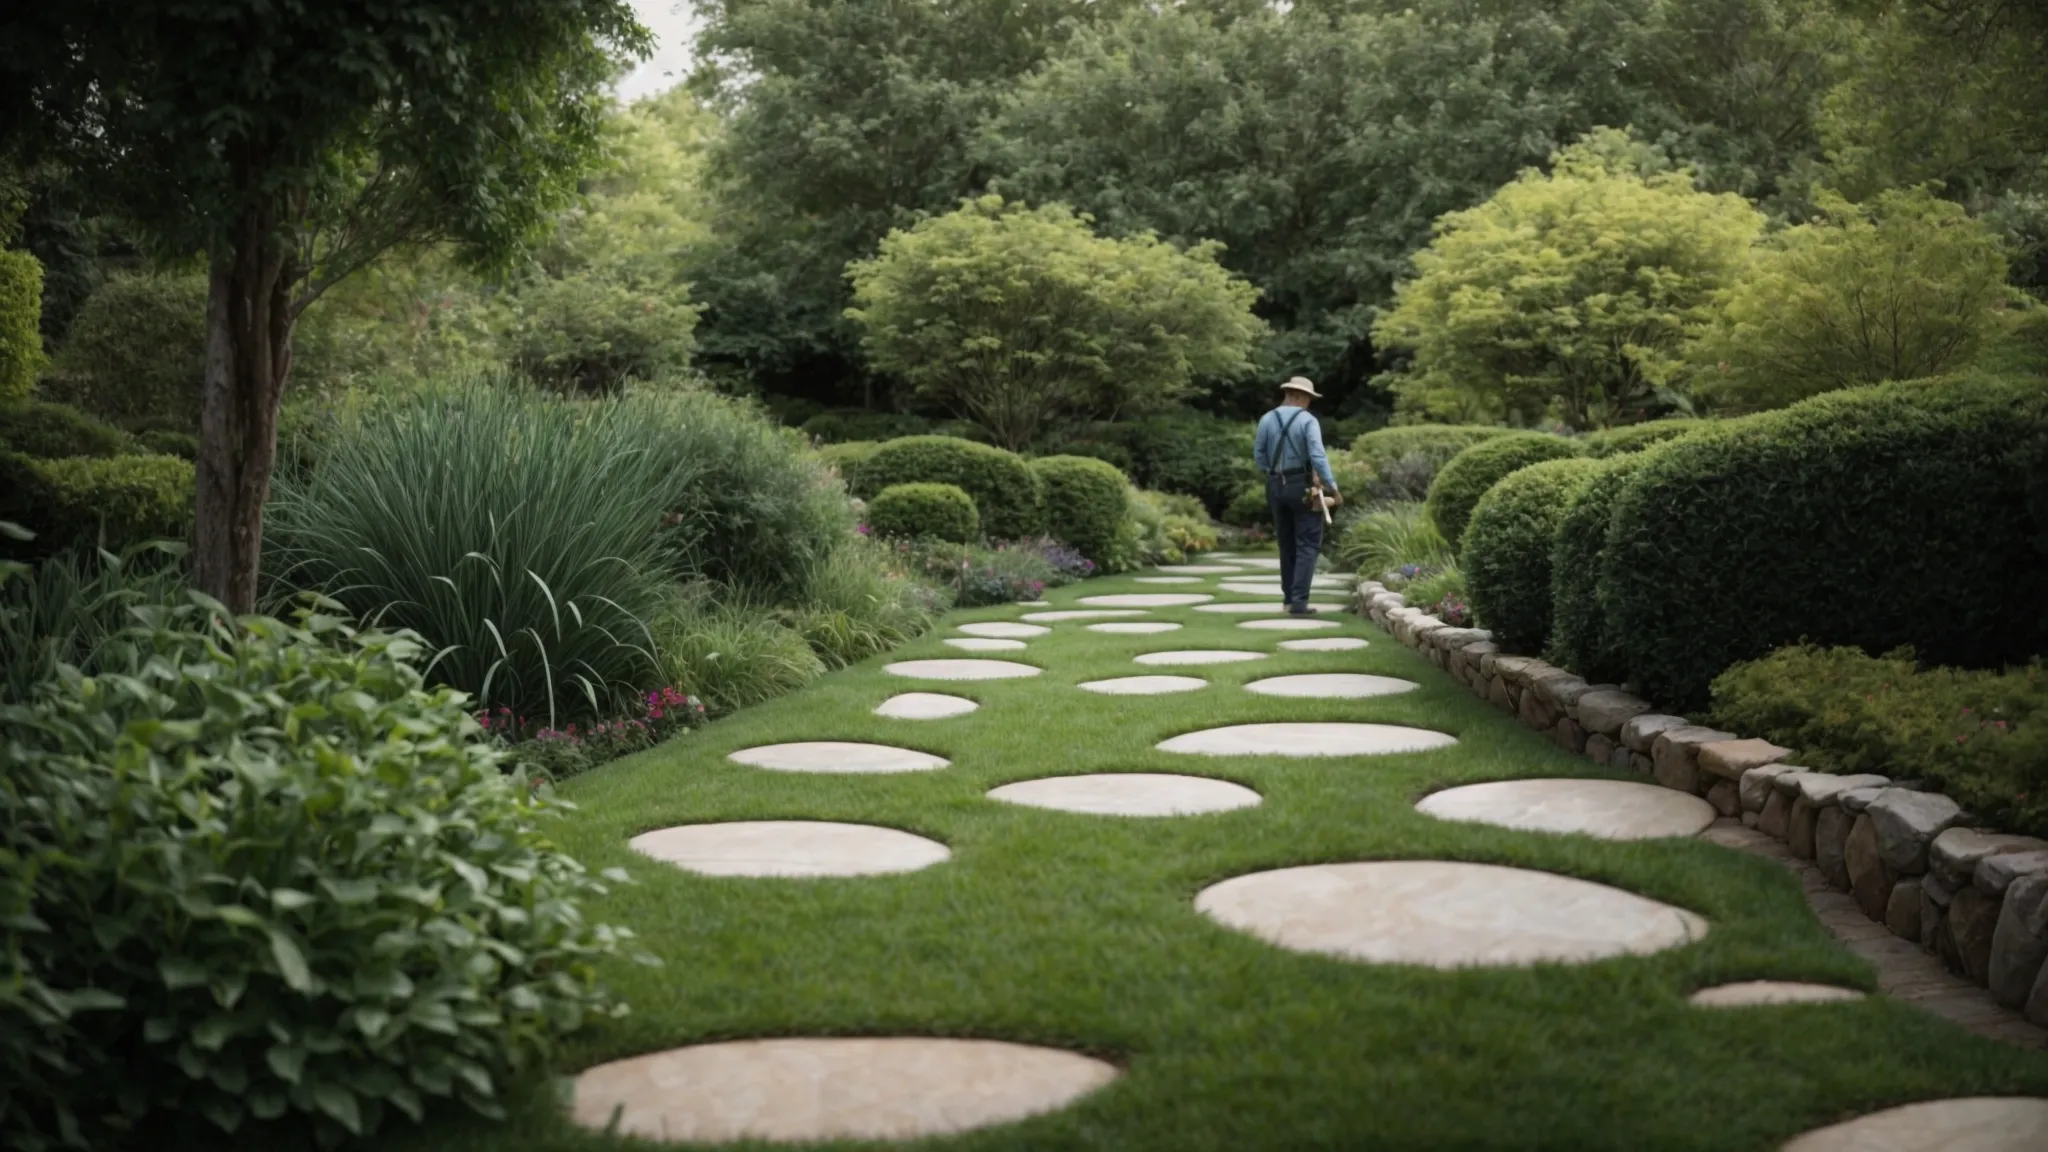 a landscaper gently lays a path of stepping stones across a lush garden to guide foot traffic and protect the ground beneath.